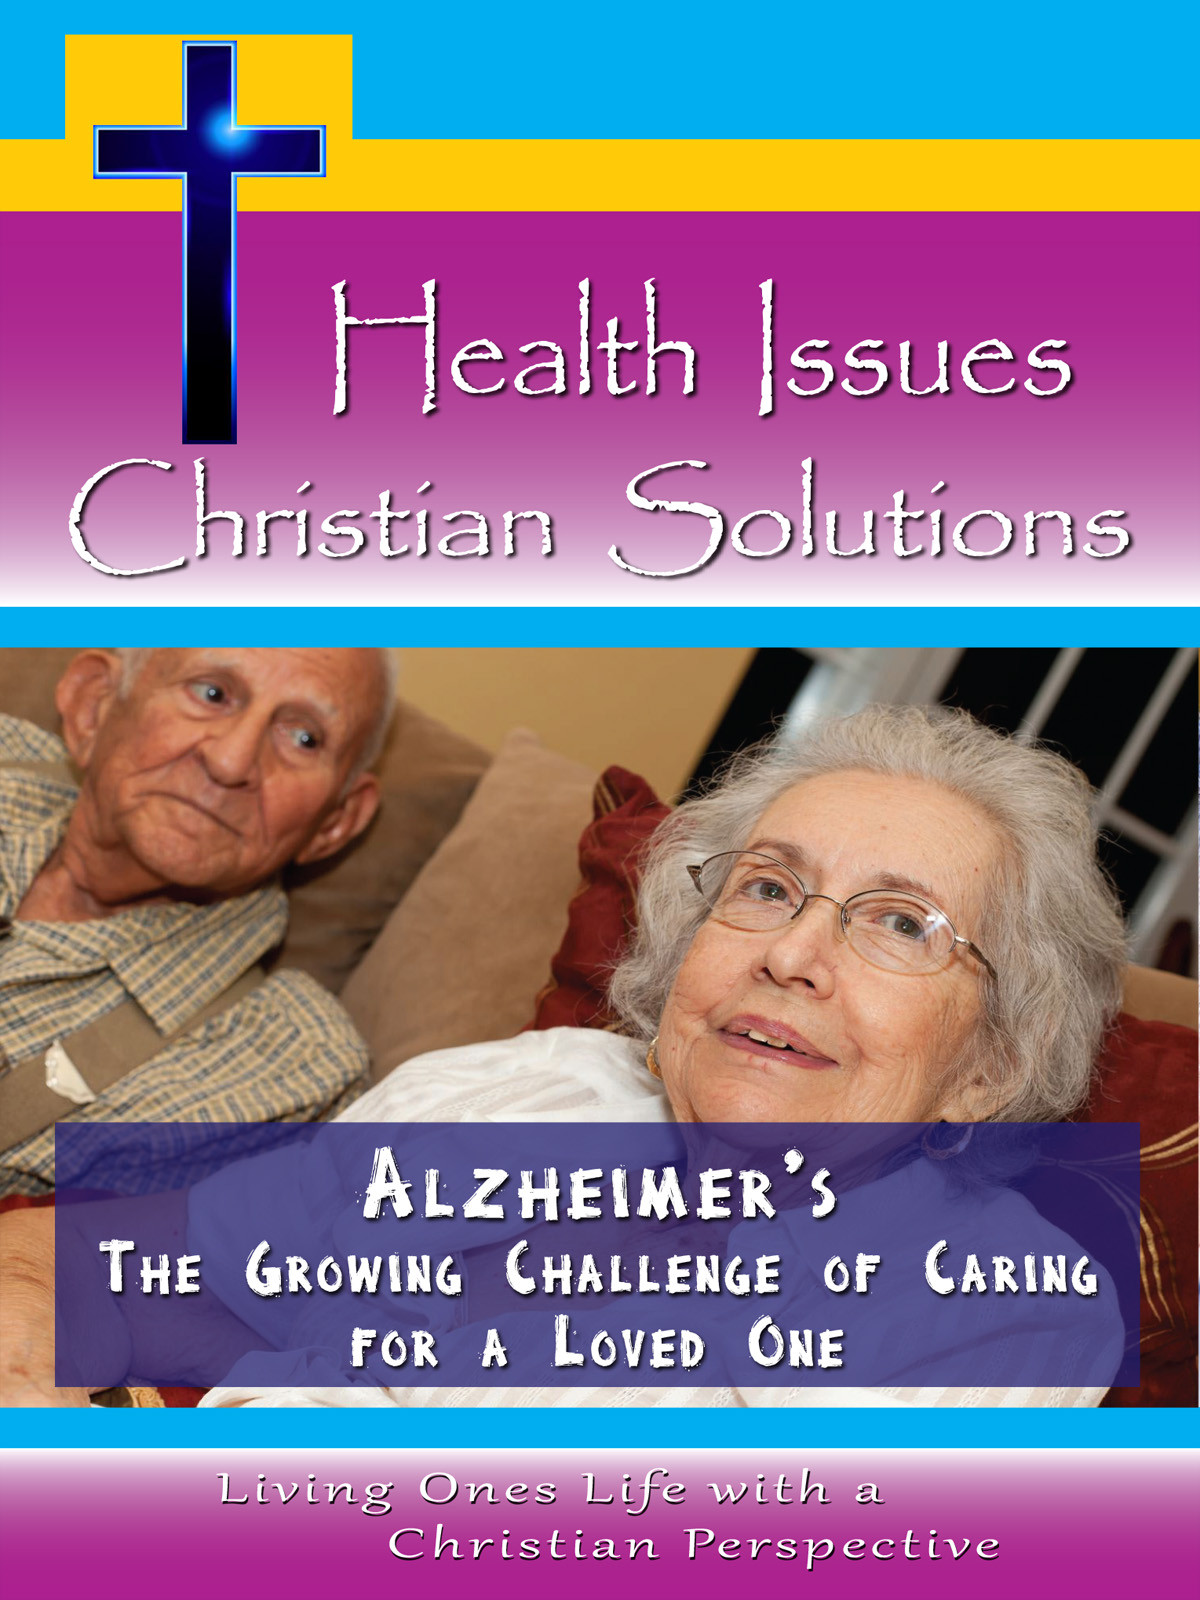 CH10030 - Alzheimer's The Growing Challenge of Caring for a Loved One